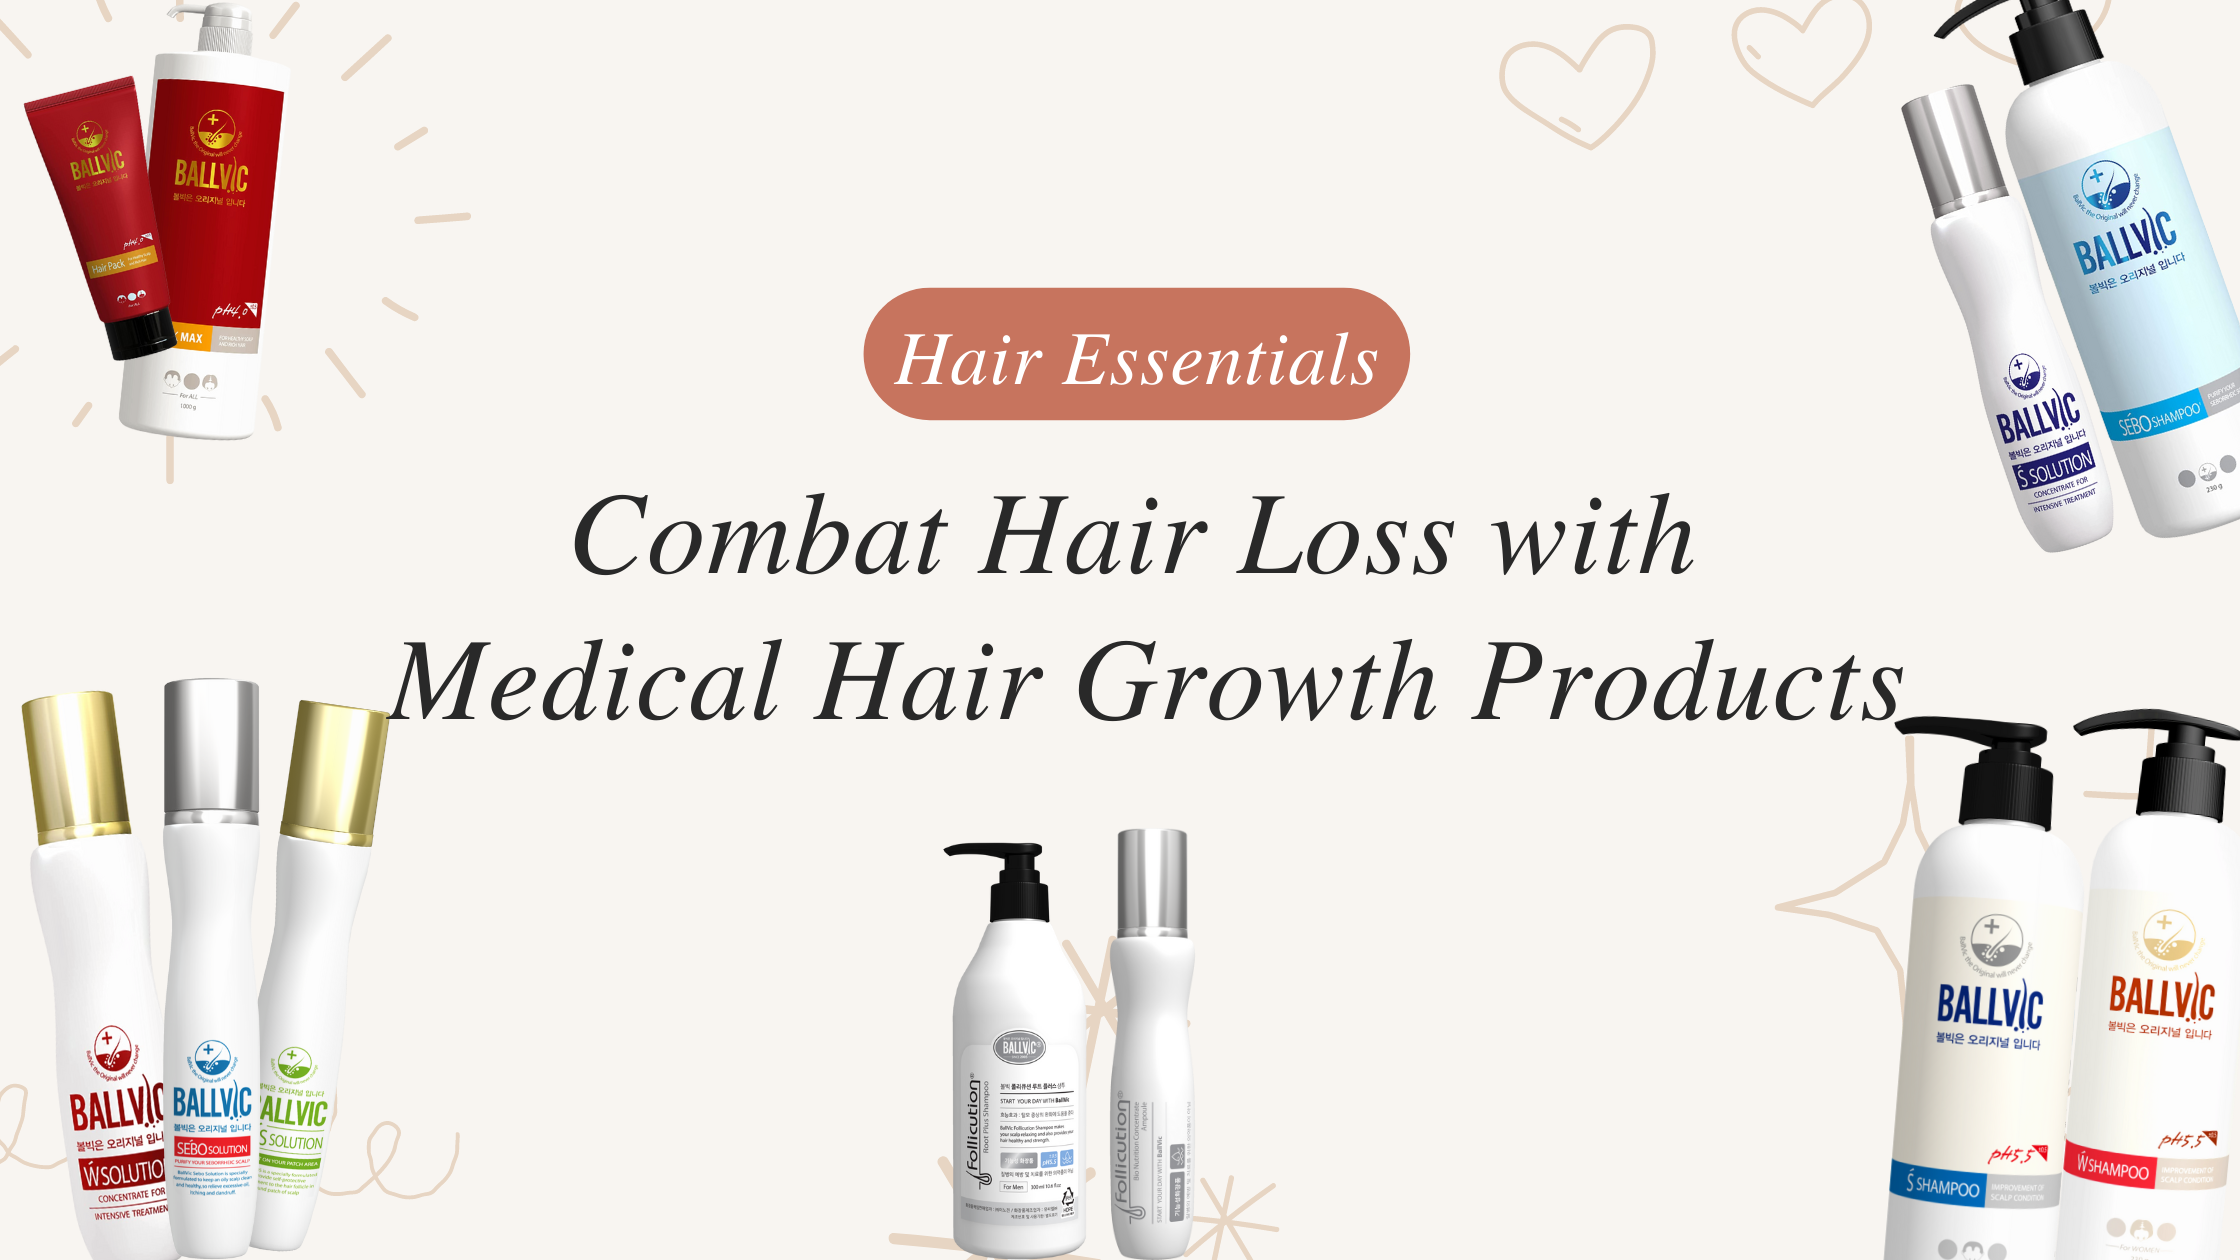 Combat Hair Loss with These Proven Hair Growth Products